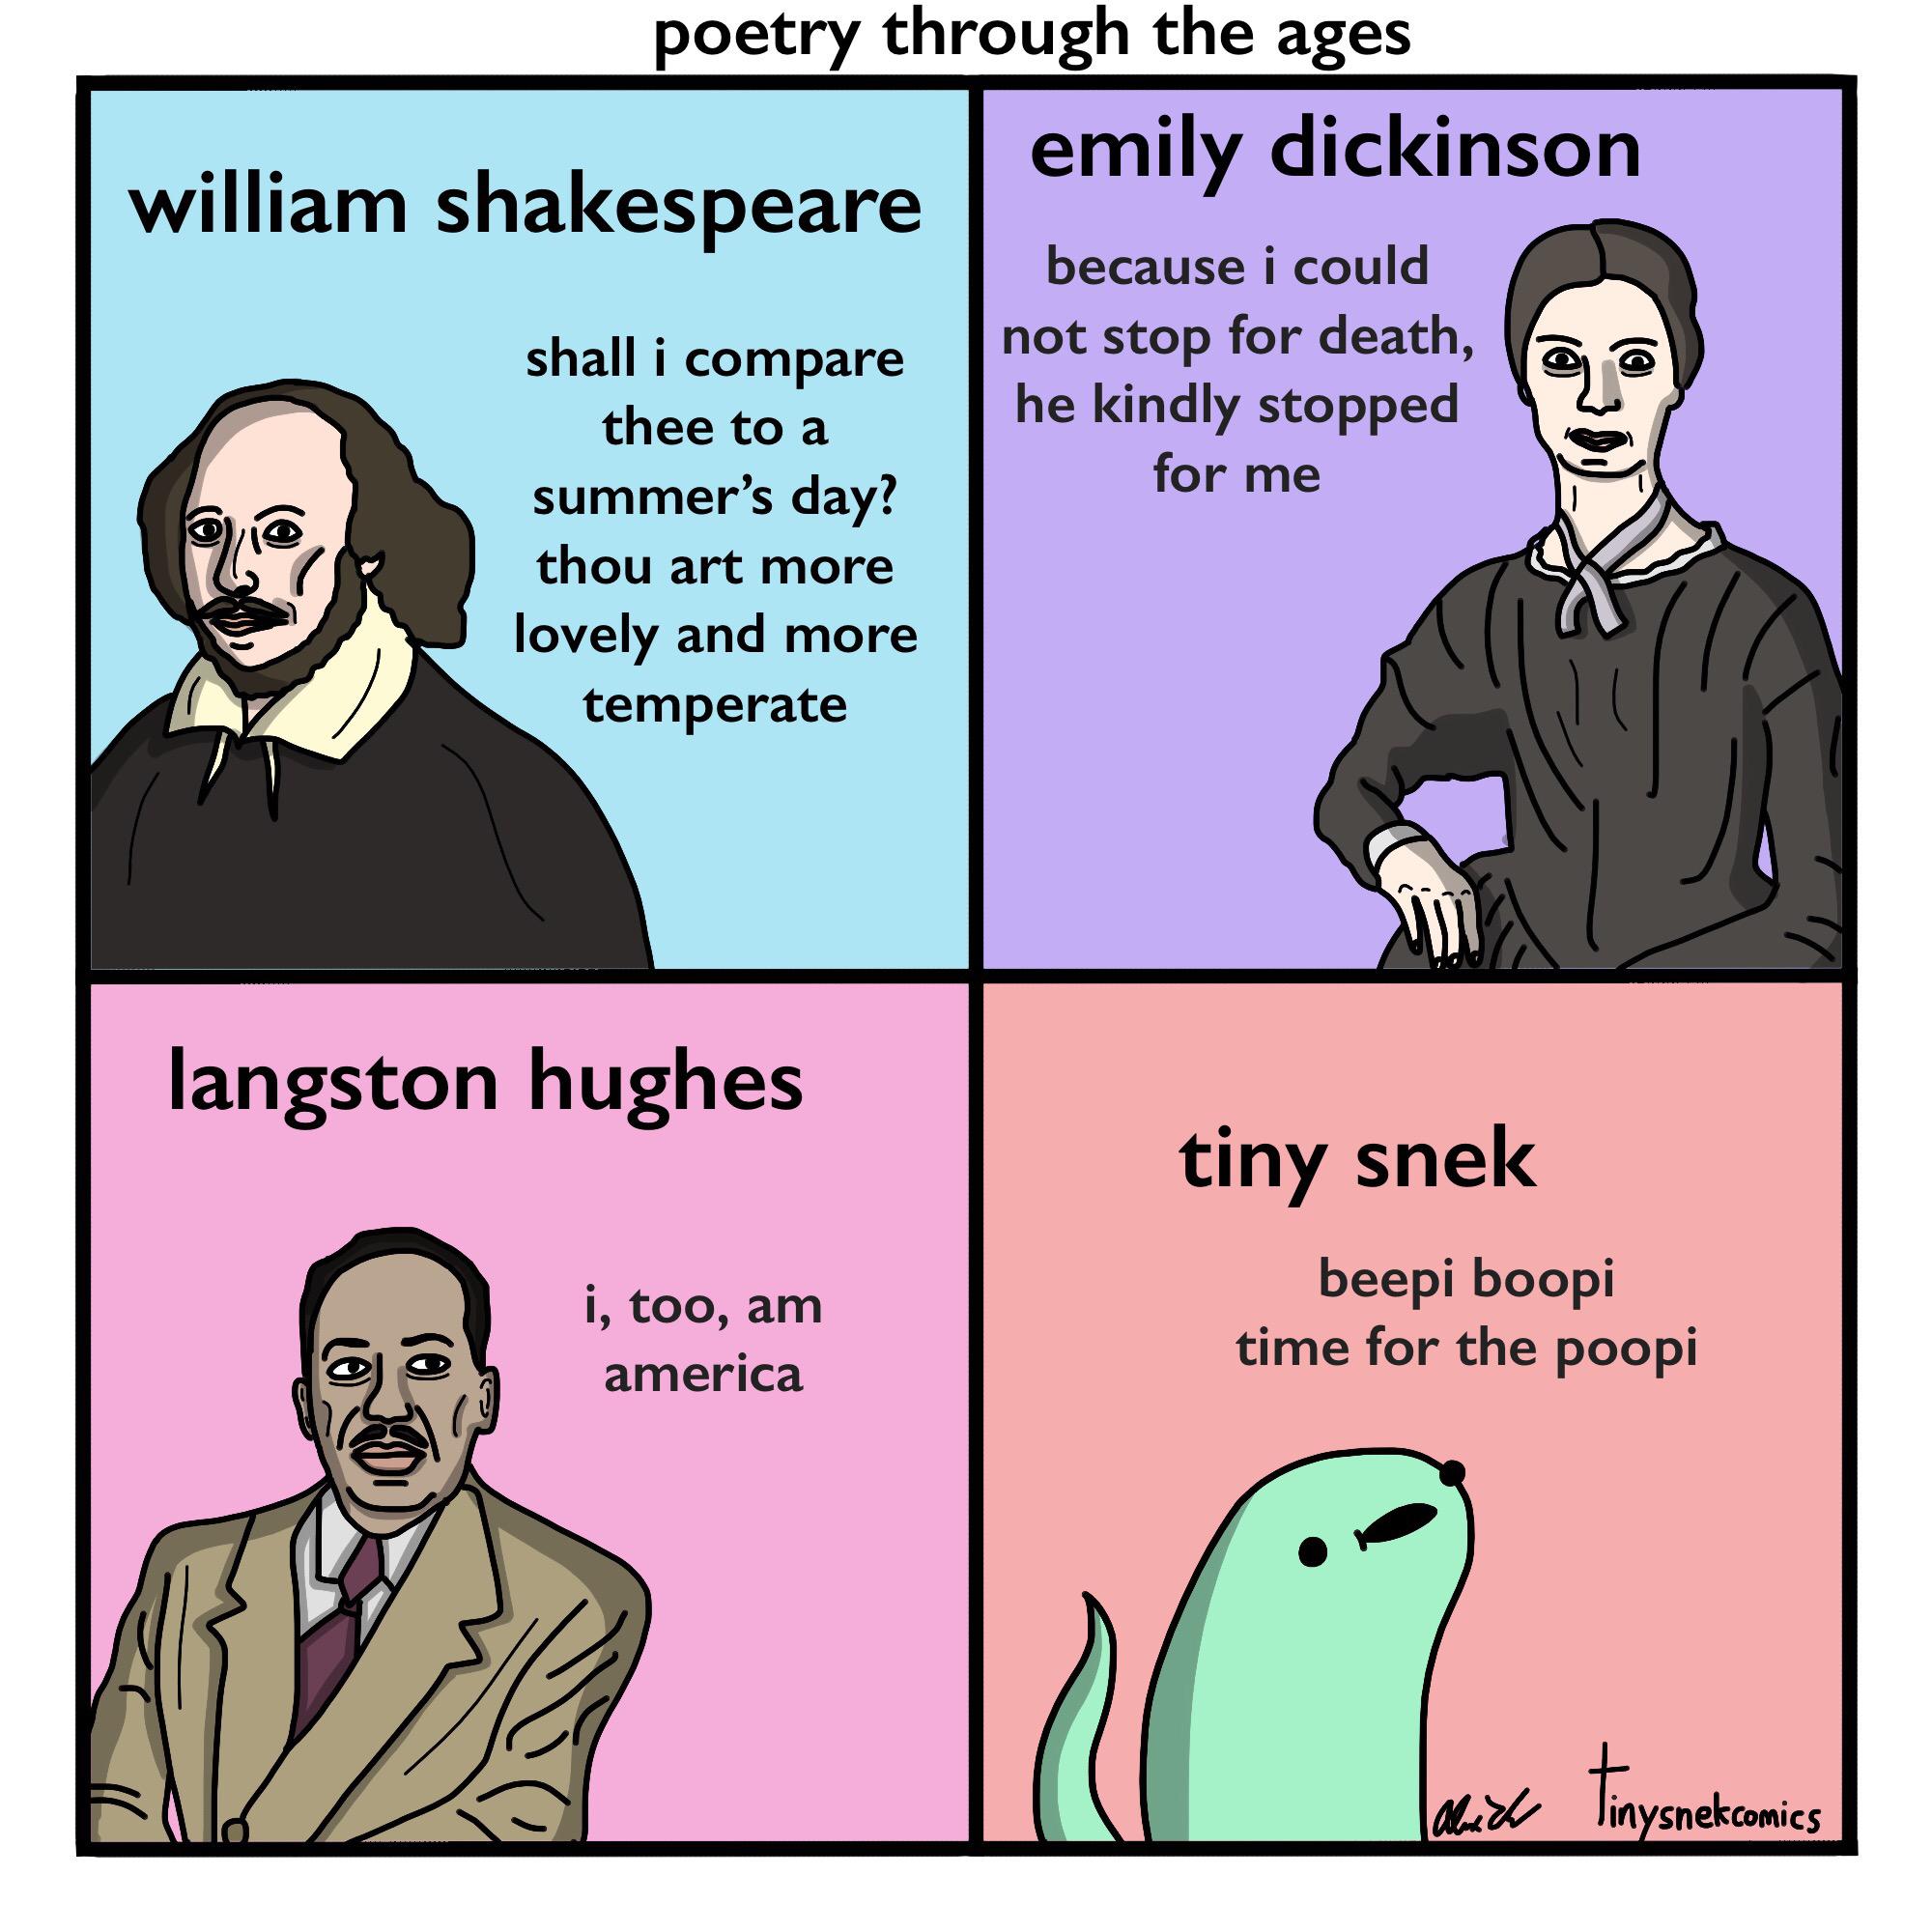 comics comics comics text: poetry through the ages william shal<espeare shall i compare thee to a summer's day? thou art more lovely and more temperate langston hughes i, too, am america emily dickinson because i could not stop for death, he kindly stopped for me tiny snel< beepi boopi time for the poopi in snekcomics 